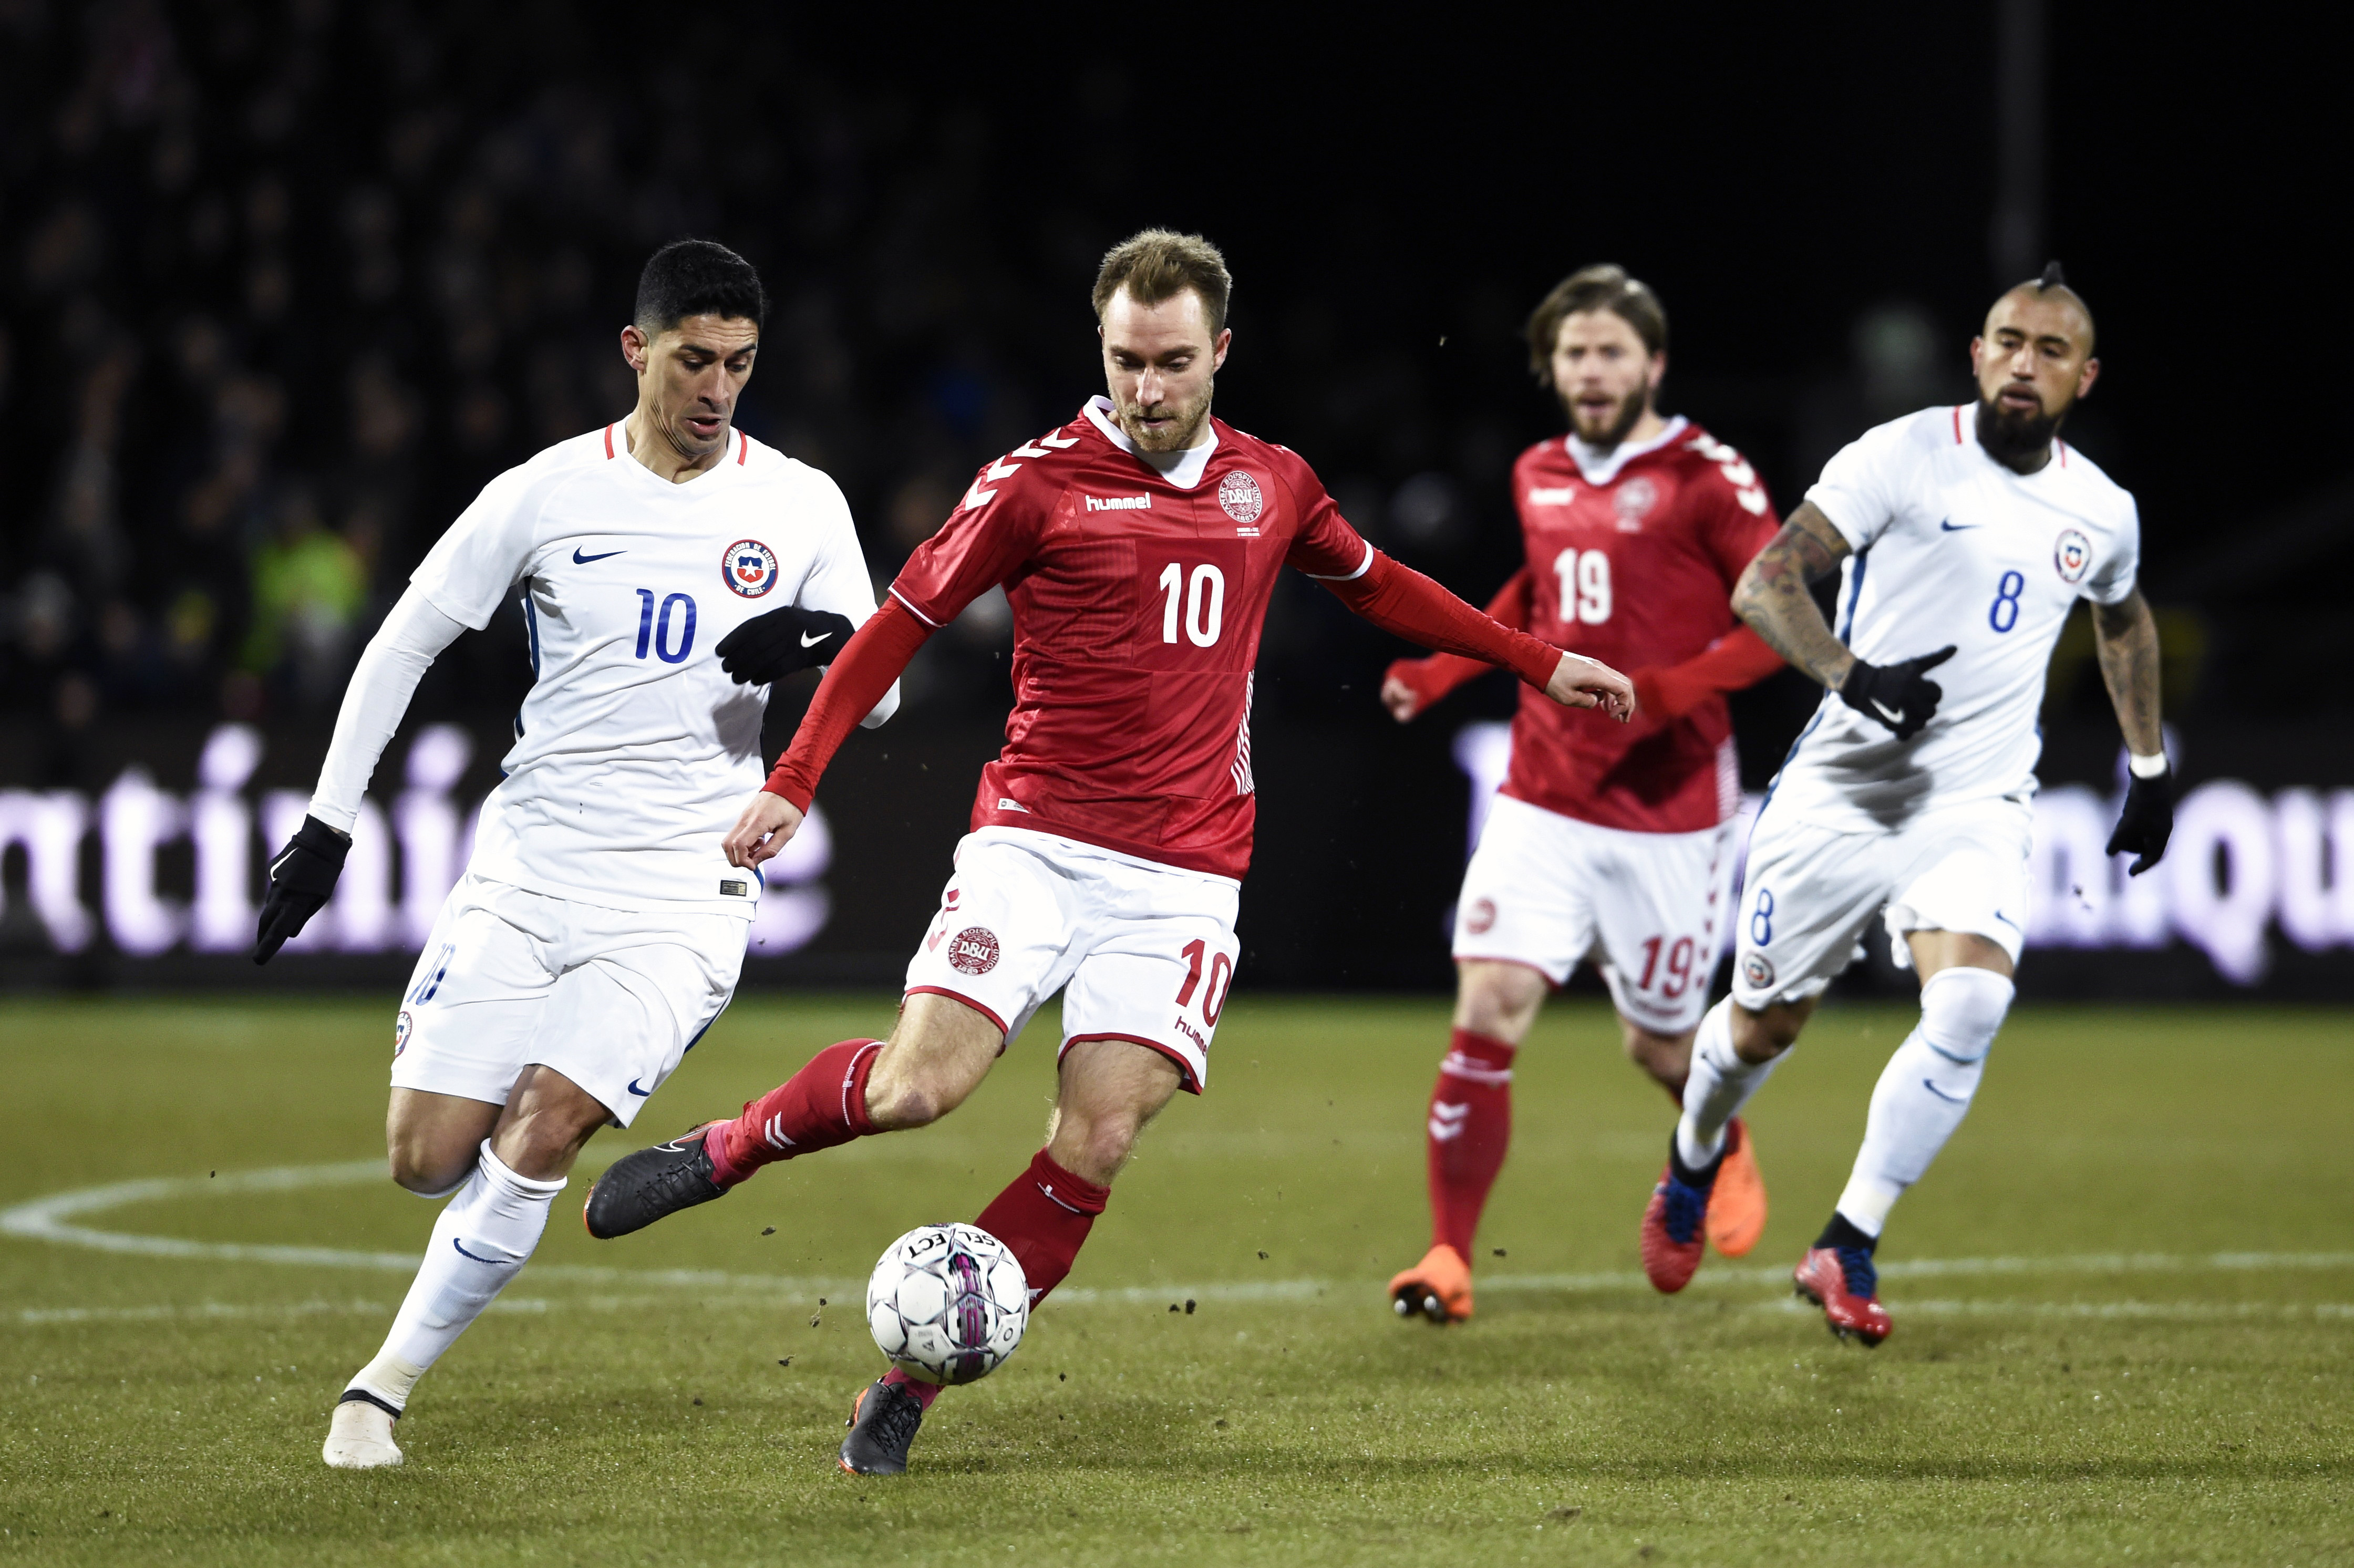 Denmark's Christian Eriksen (2L) and Chile's Pedro Pablo Hernandez vie for the ball during their international friendly football match between Denmark and Chile in Aalborg, Denmark on March 27, 2018. / AFP PHOTO / Ritzau Scanpix AND Scanpix / Henning Bagger / Denmark OUT        (Photo credit should read HENNING BAGGER/AFP/Getty Images)